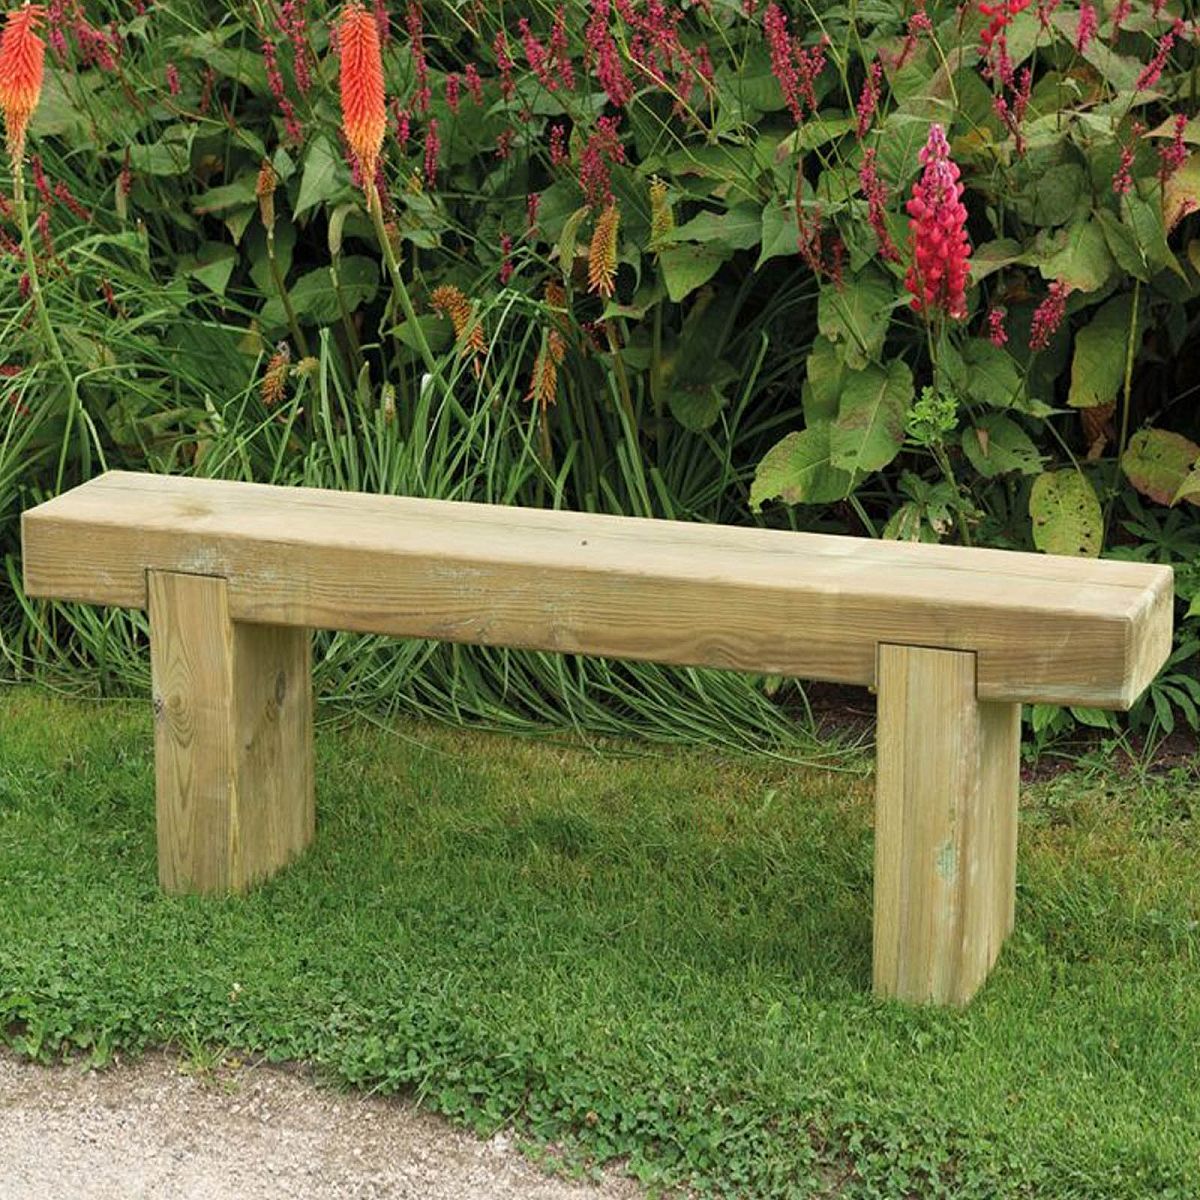 Outdoor Wooden Double Sleeper Bench by Forest Garden